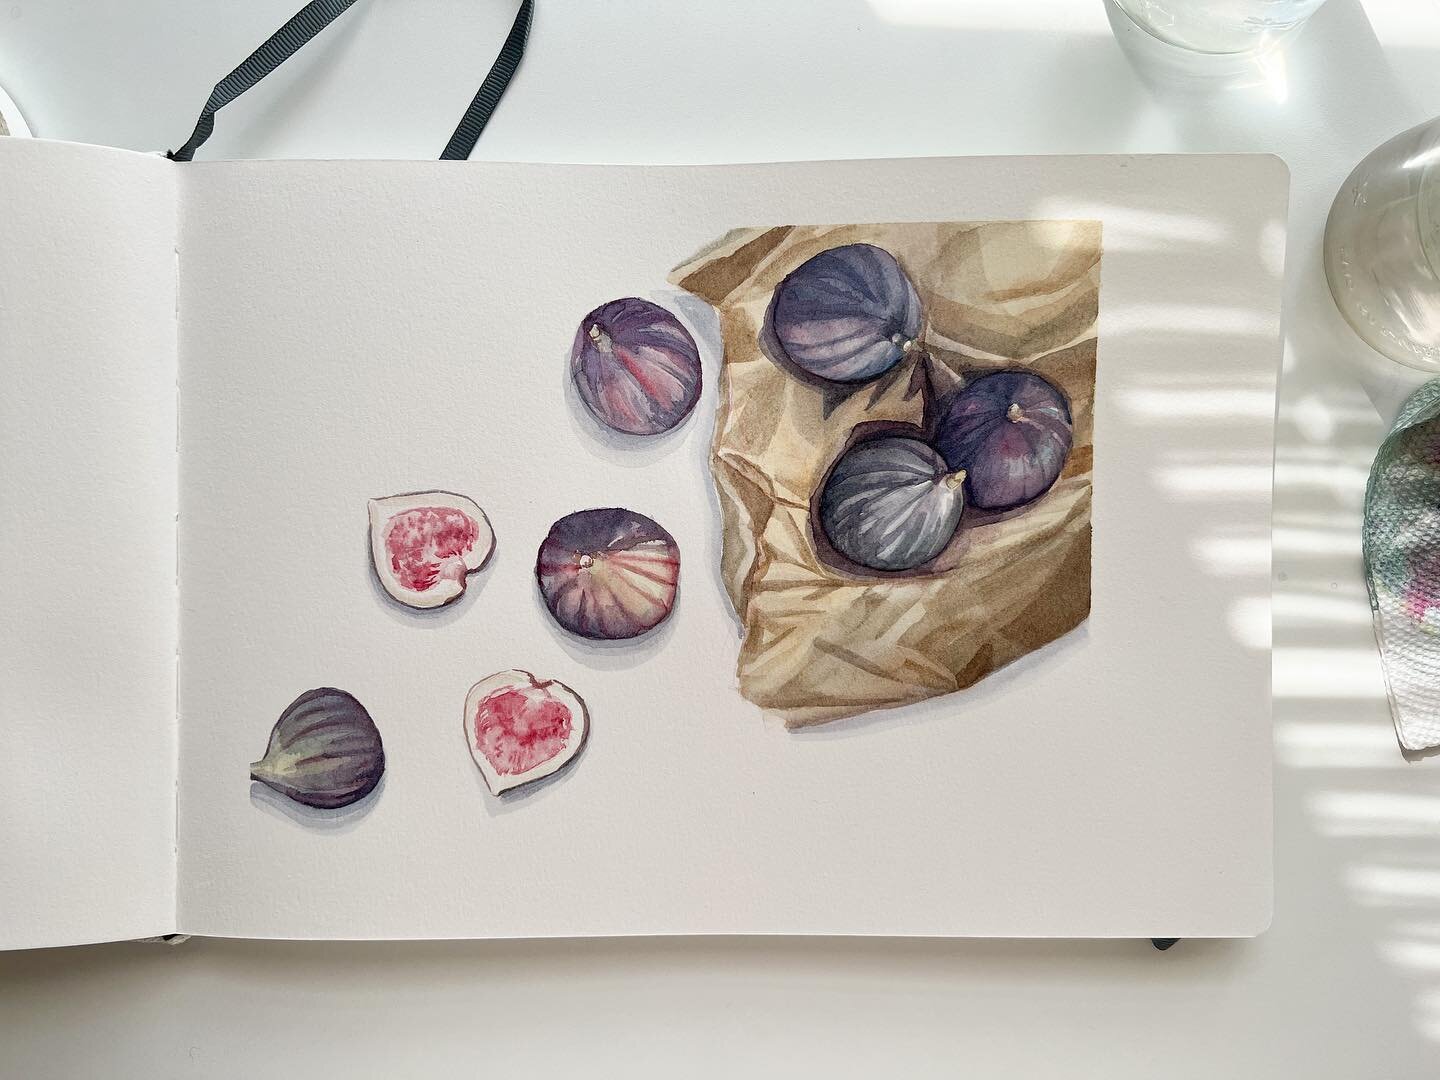 The yummiest page in my #etchrsketchbook yet. 
The shadows off the figs may be my favorite part of this. 

This makes me feel almost as cool as @begoodnatured! Have you seen her #daniivessketchbook?! They are a beauty! 😍

#tramcolwinstudio #tramcolw